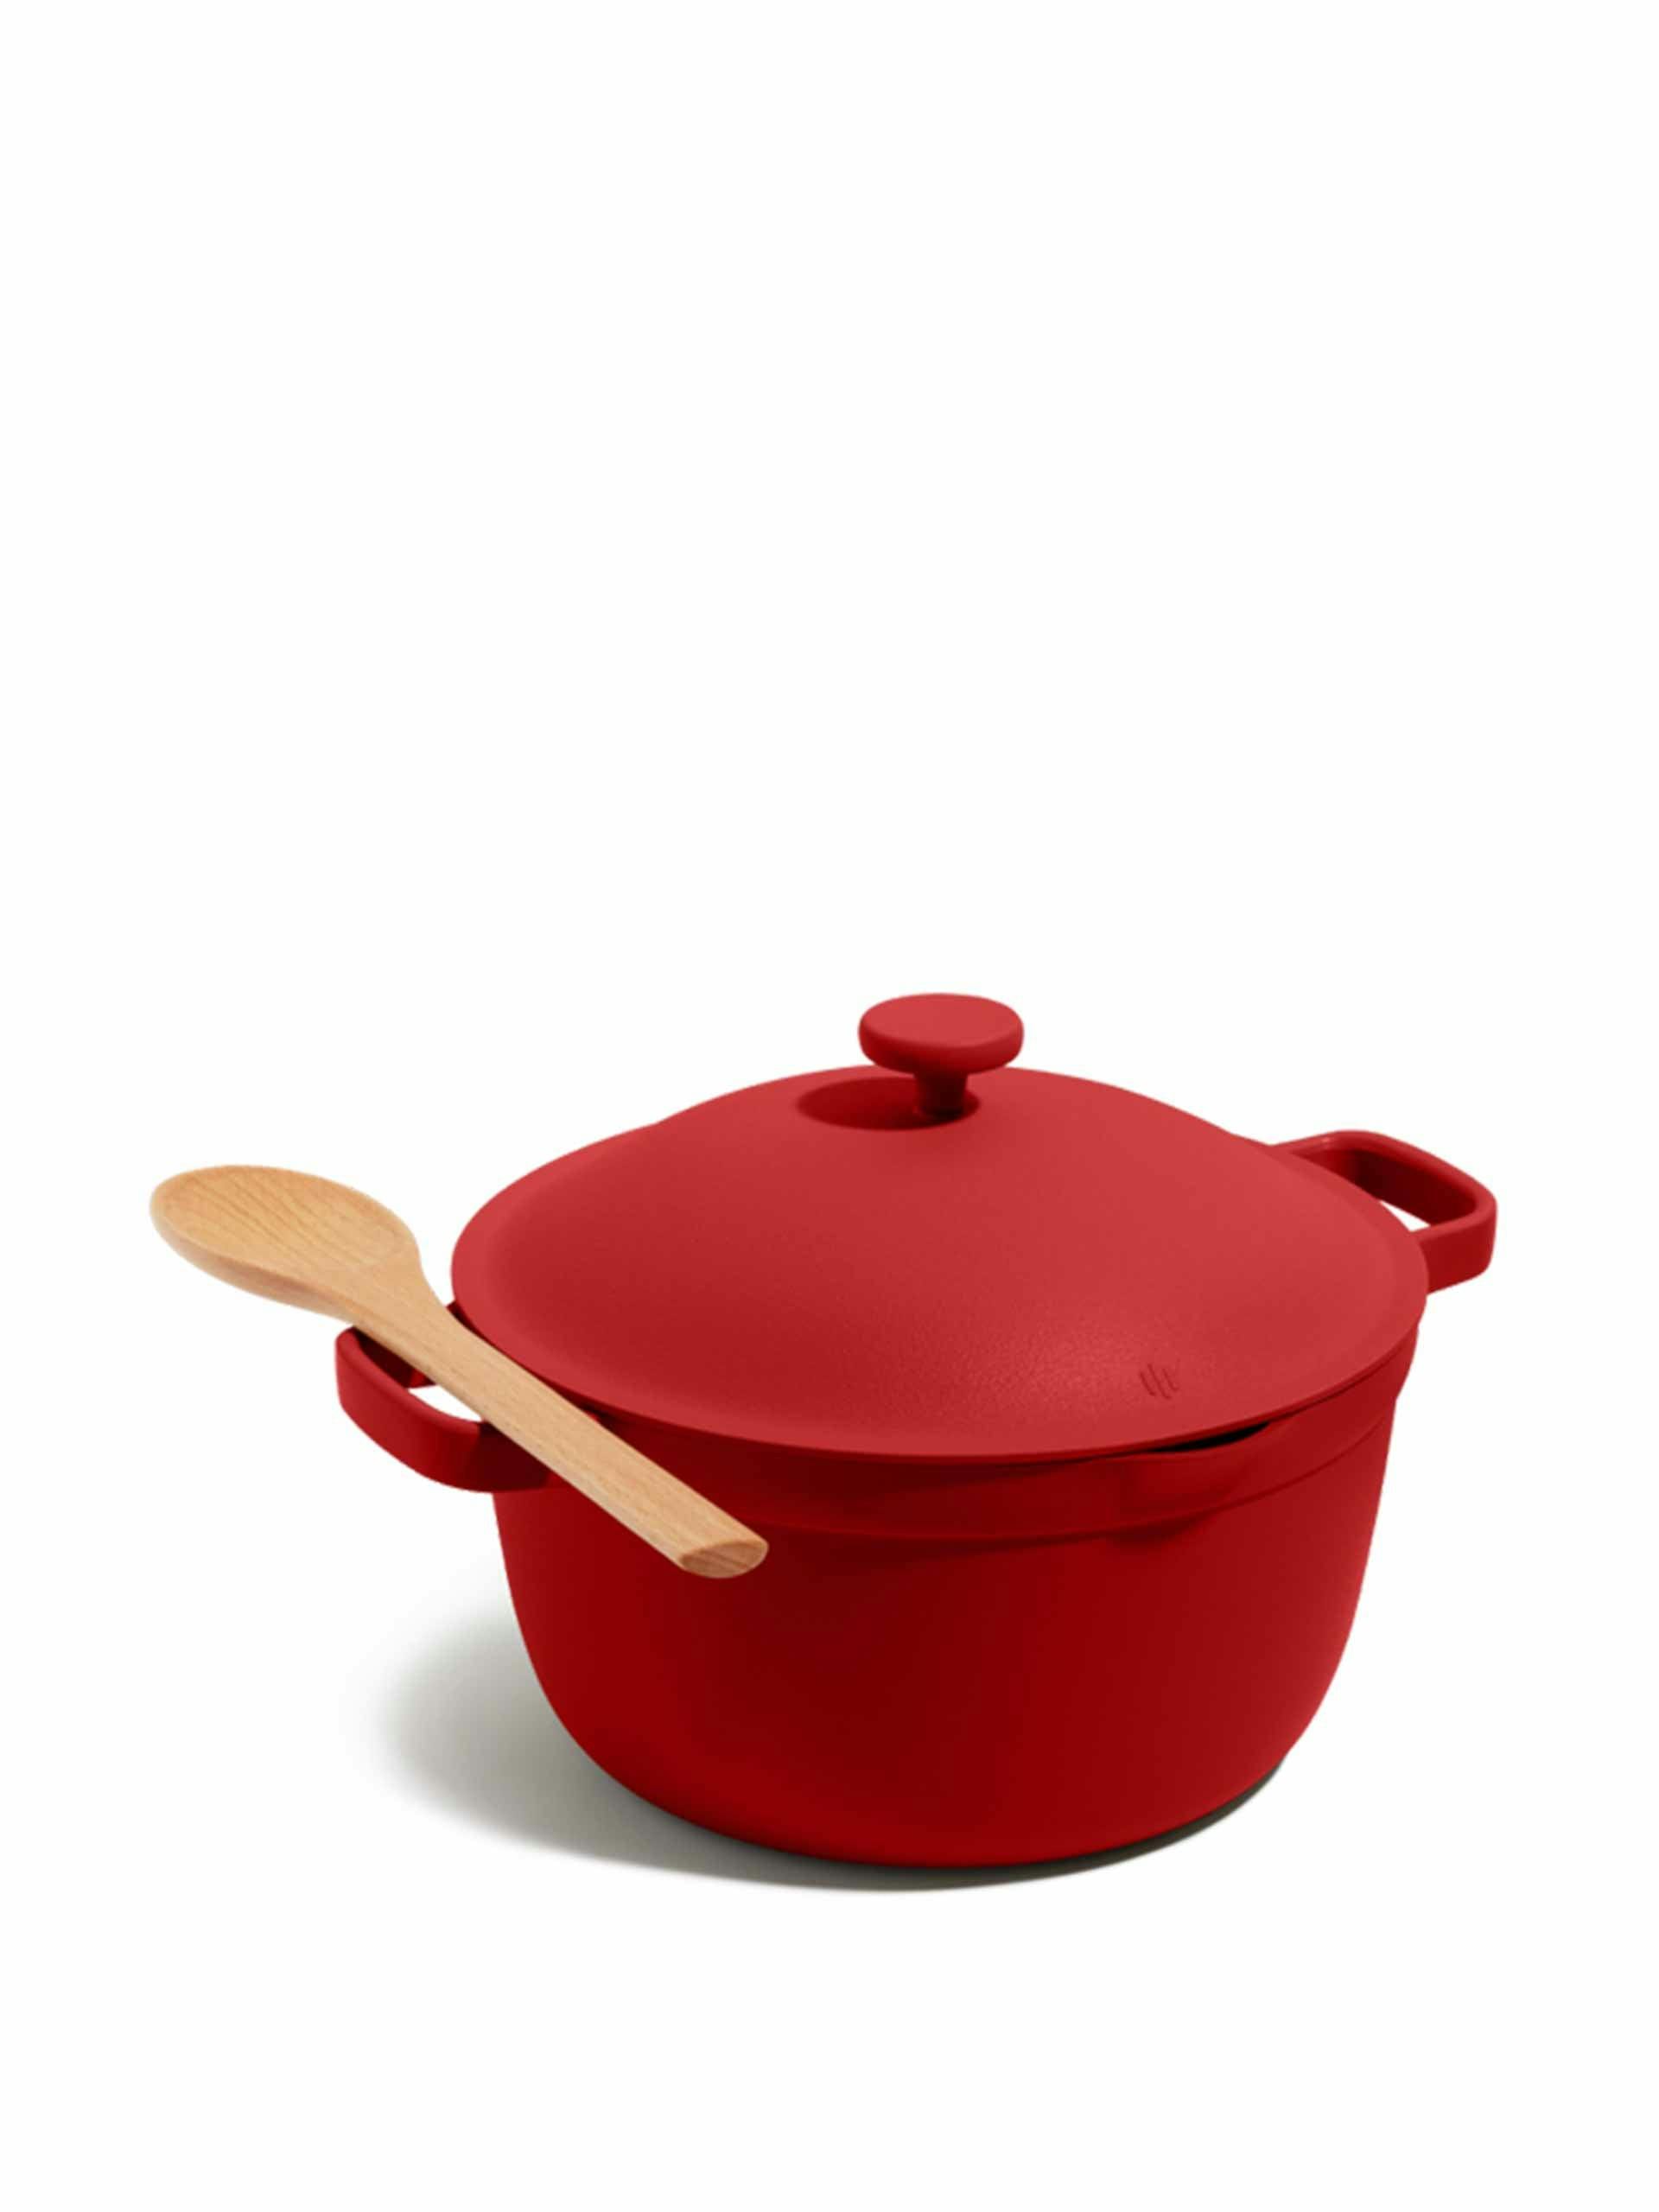 Limited edition red 'Perfect Pot'